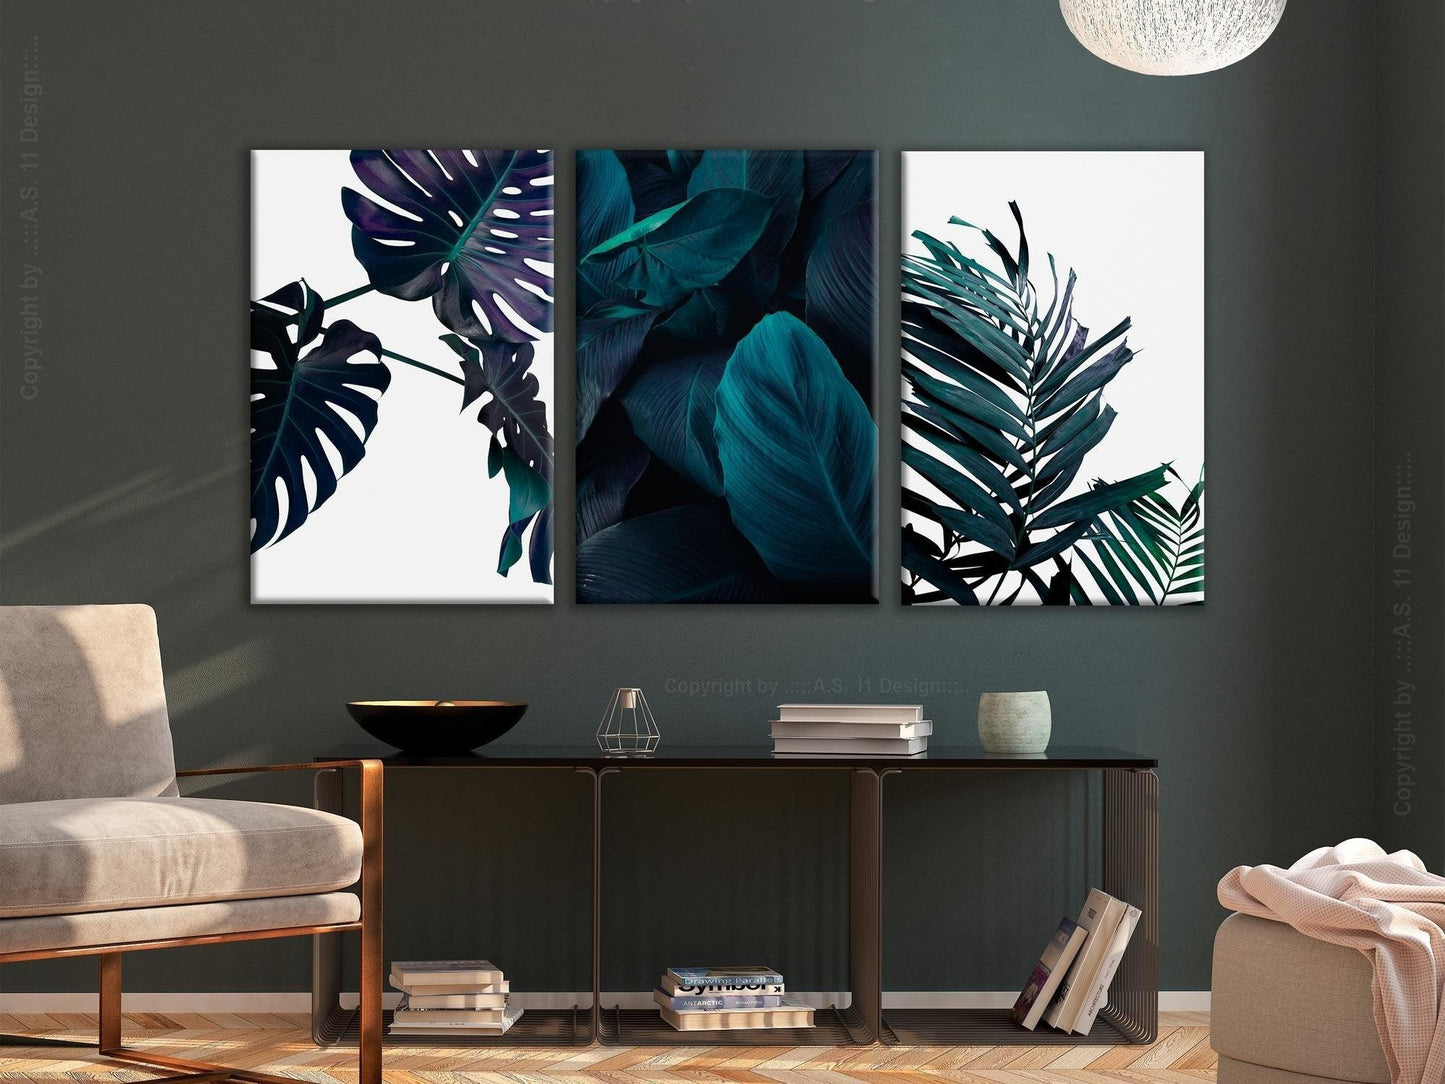 Canvas Print - Cold Leaves (3 Parts) - www.trendingbestsellers.com